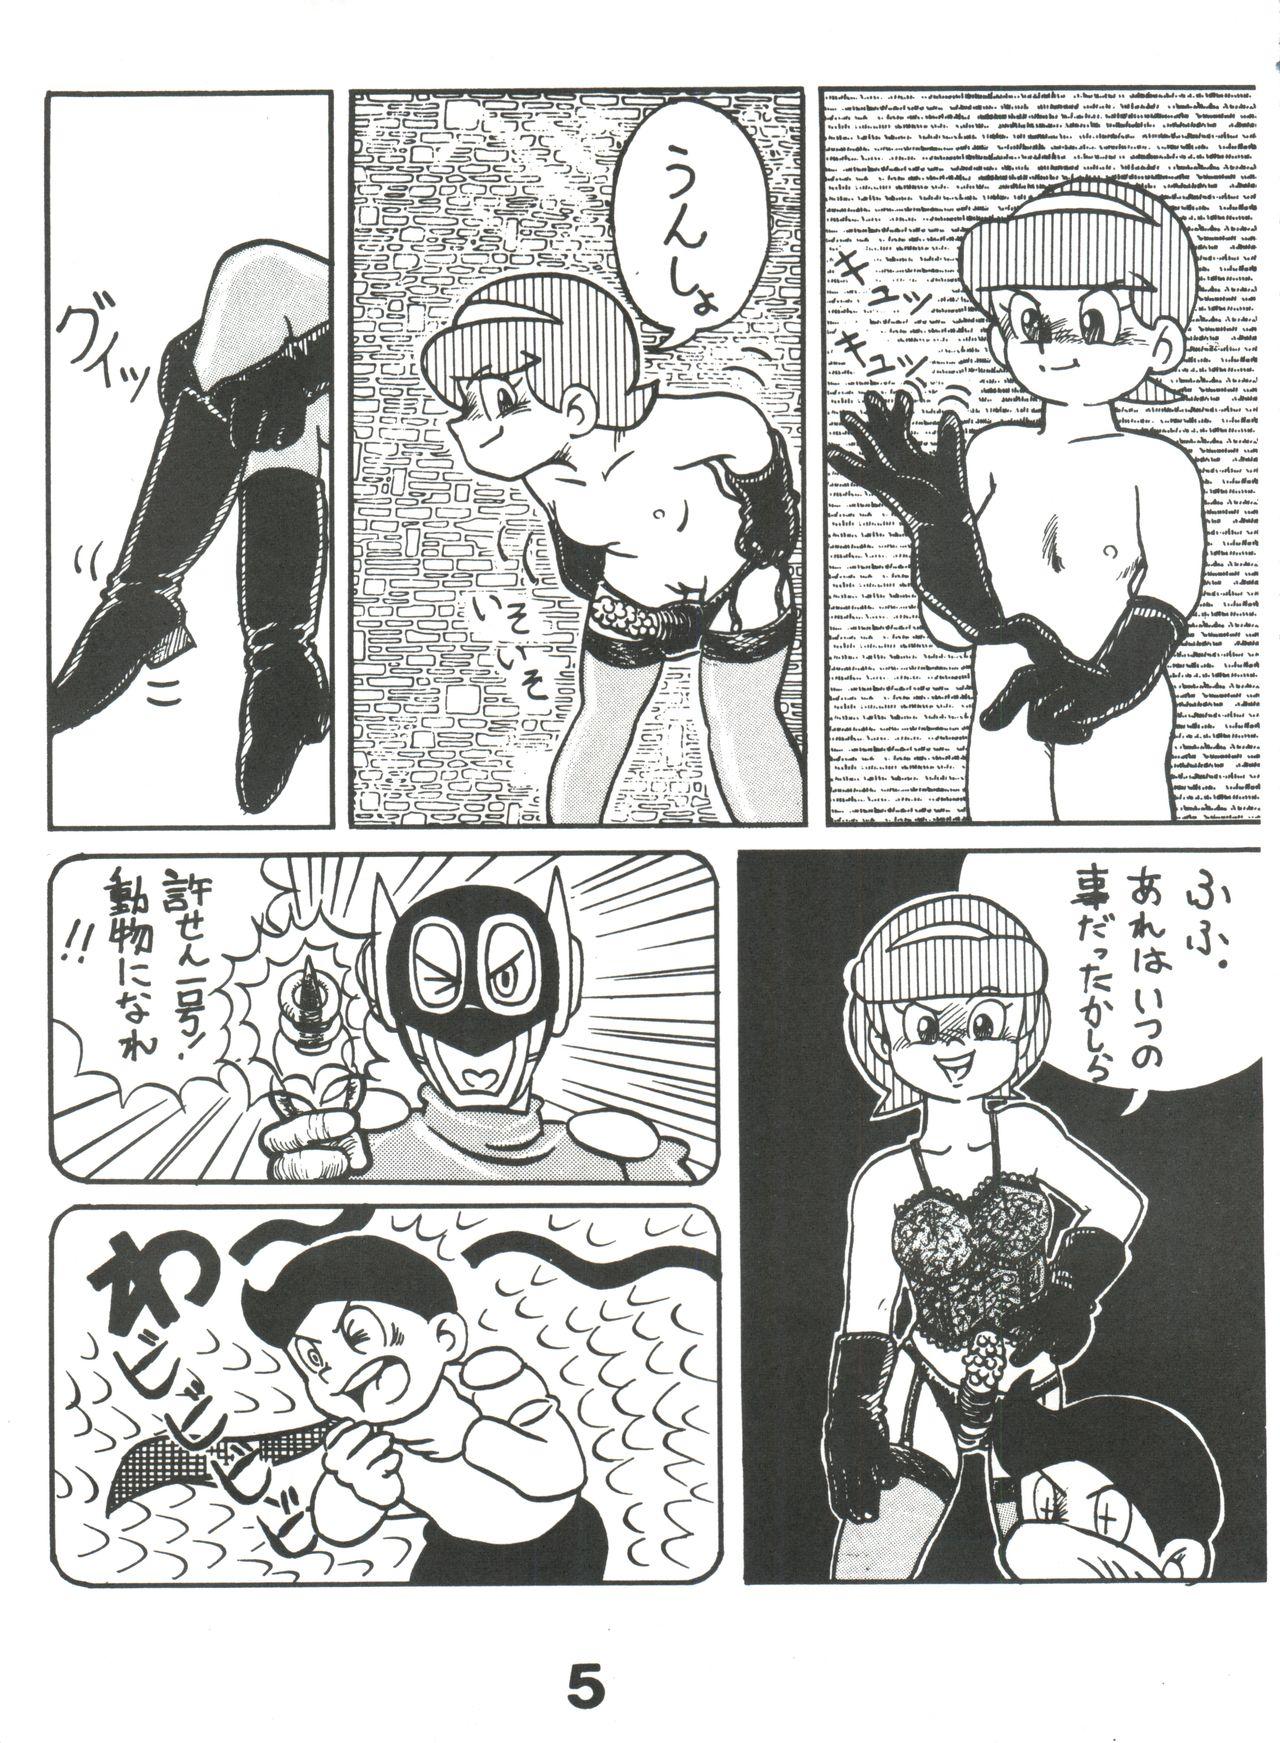 Hot Blow Jobs Sumire Special 2 - Perman For - Page 4